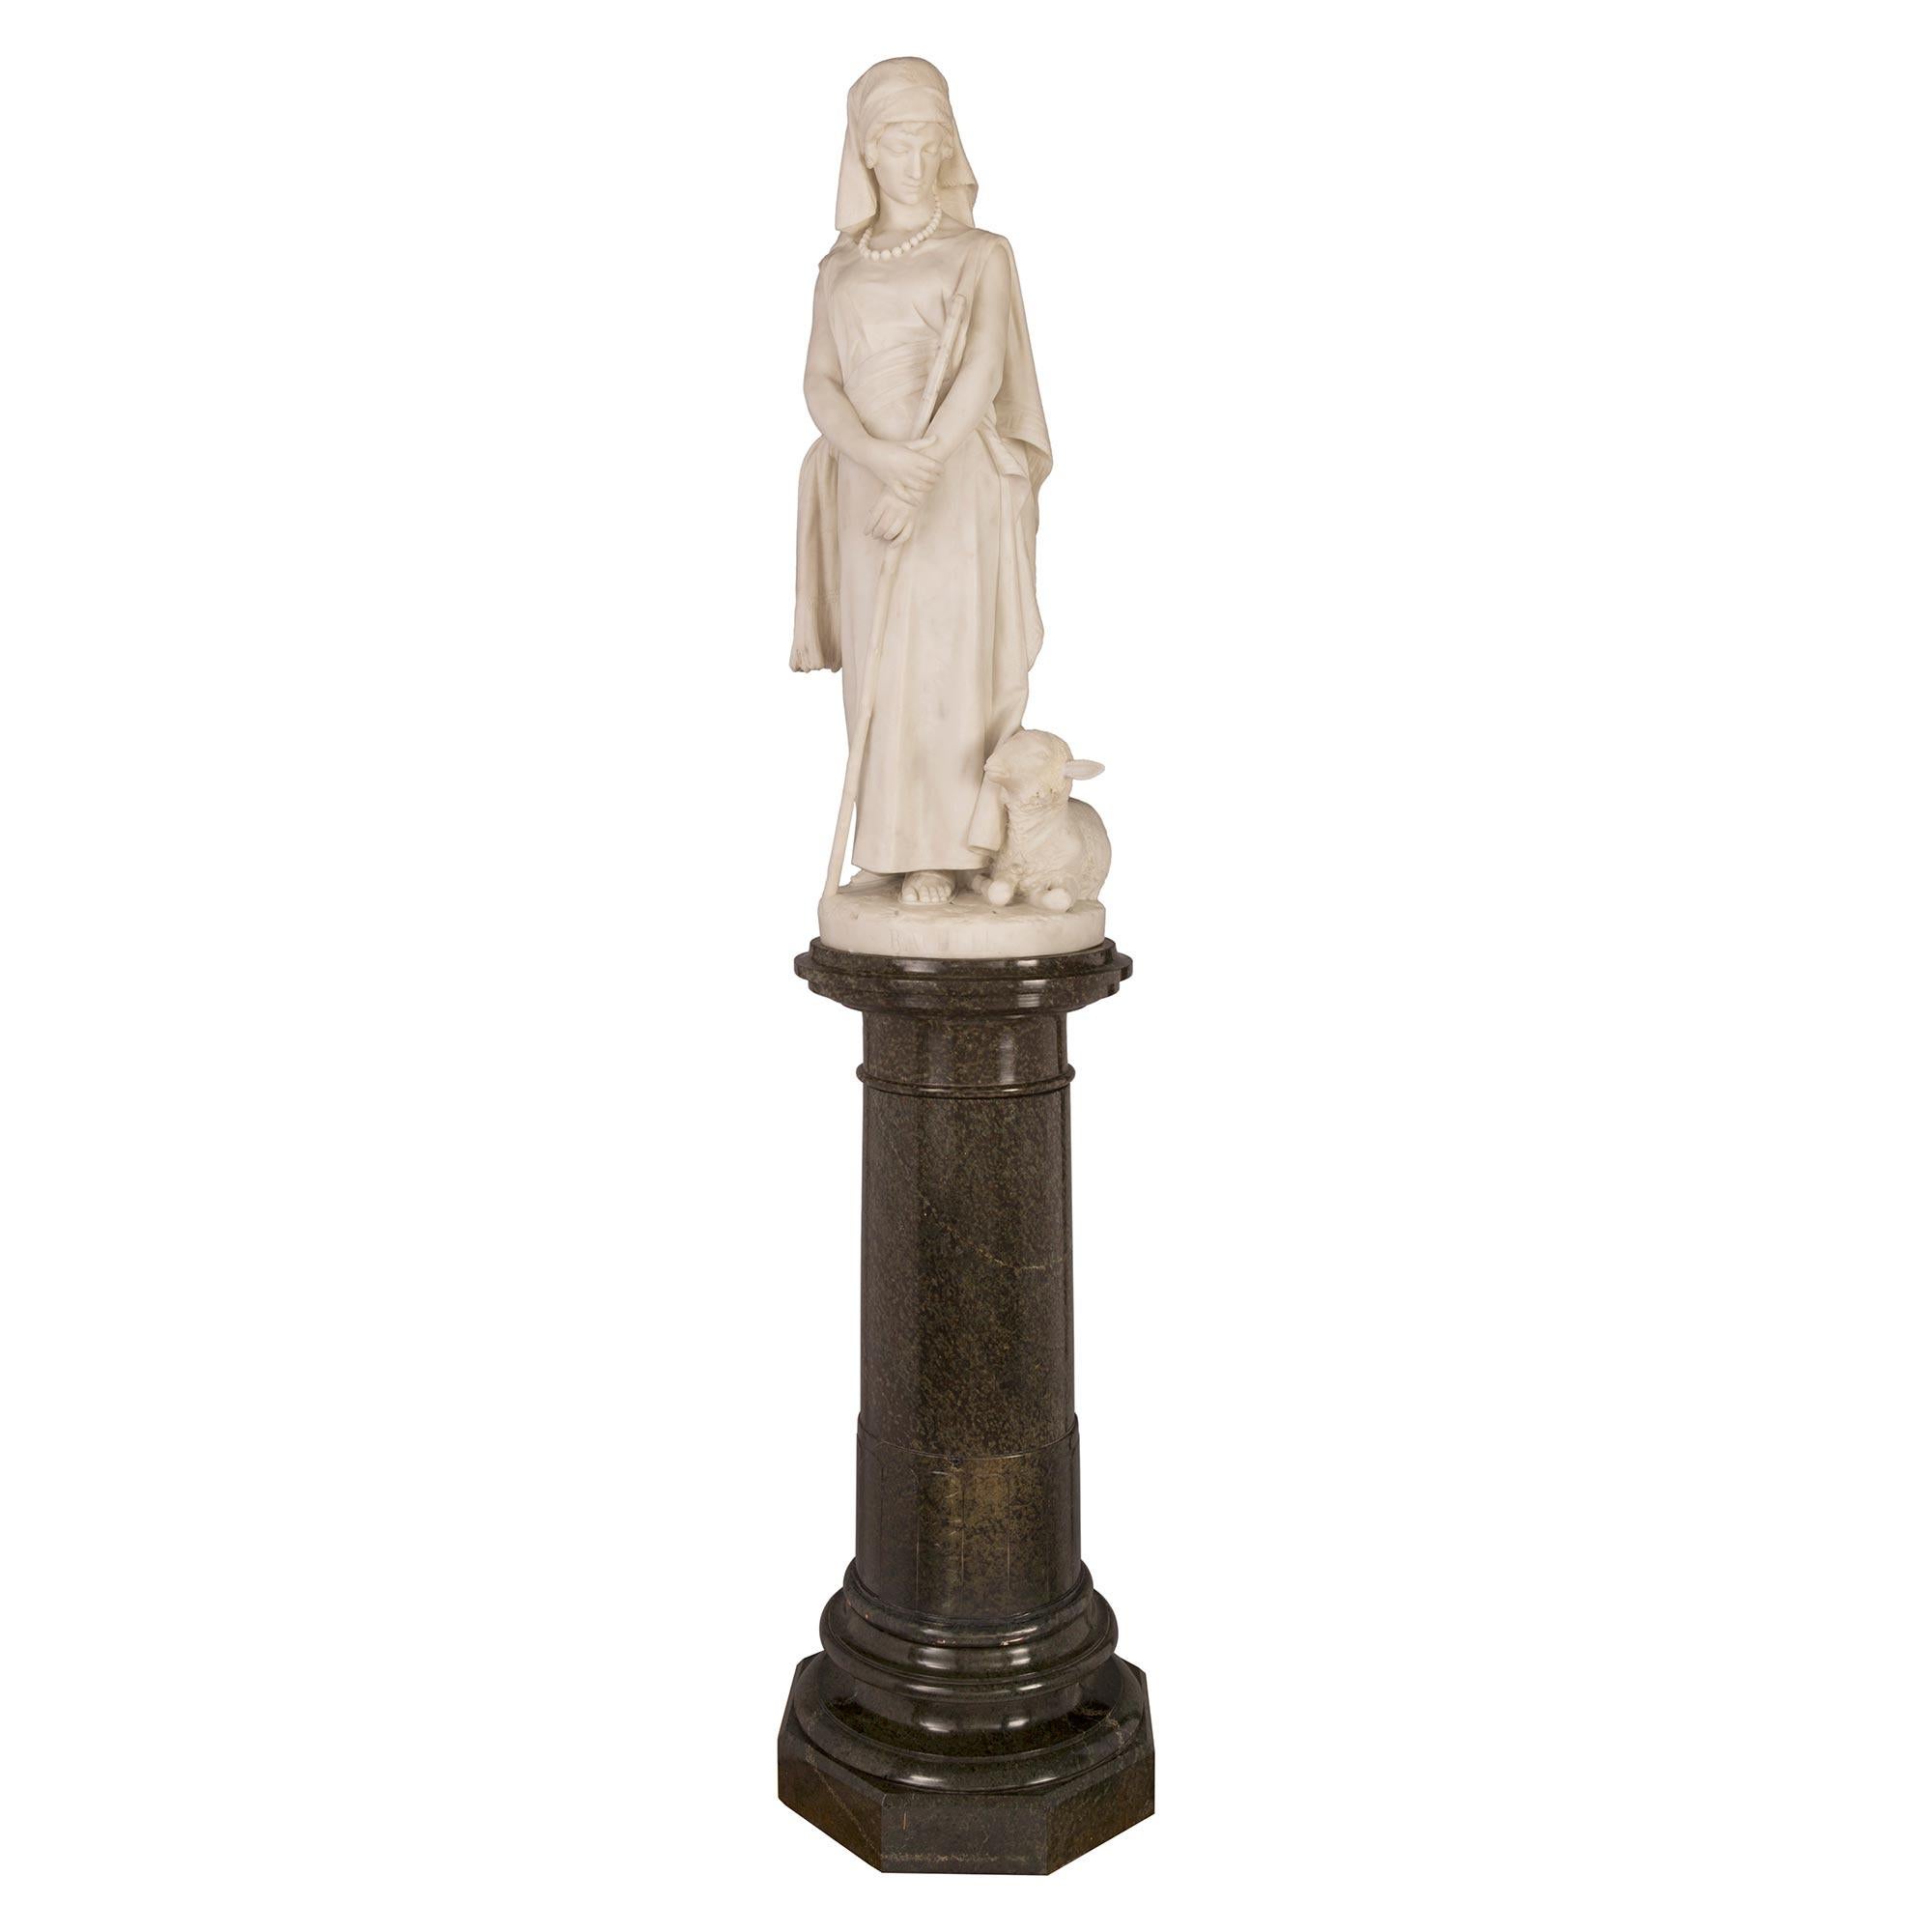 A stunning and large scale Italian 19th century white Carrara marble statue of Rachele and Lamb on it's original Vert de Patricia marble pedestal, signed F.Vichi. Firenze. The statue is raised by a its original pedestal with an octagonal base and